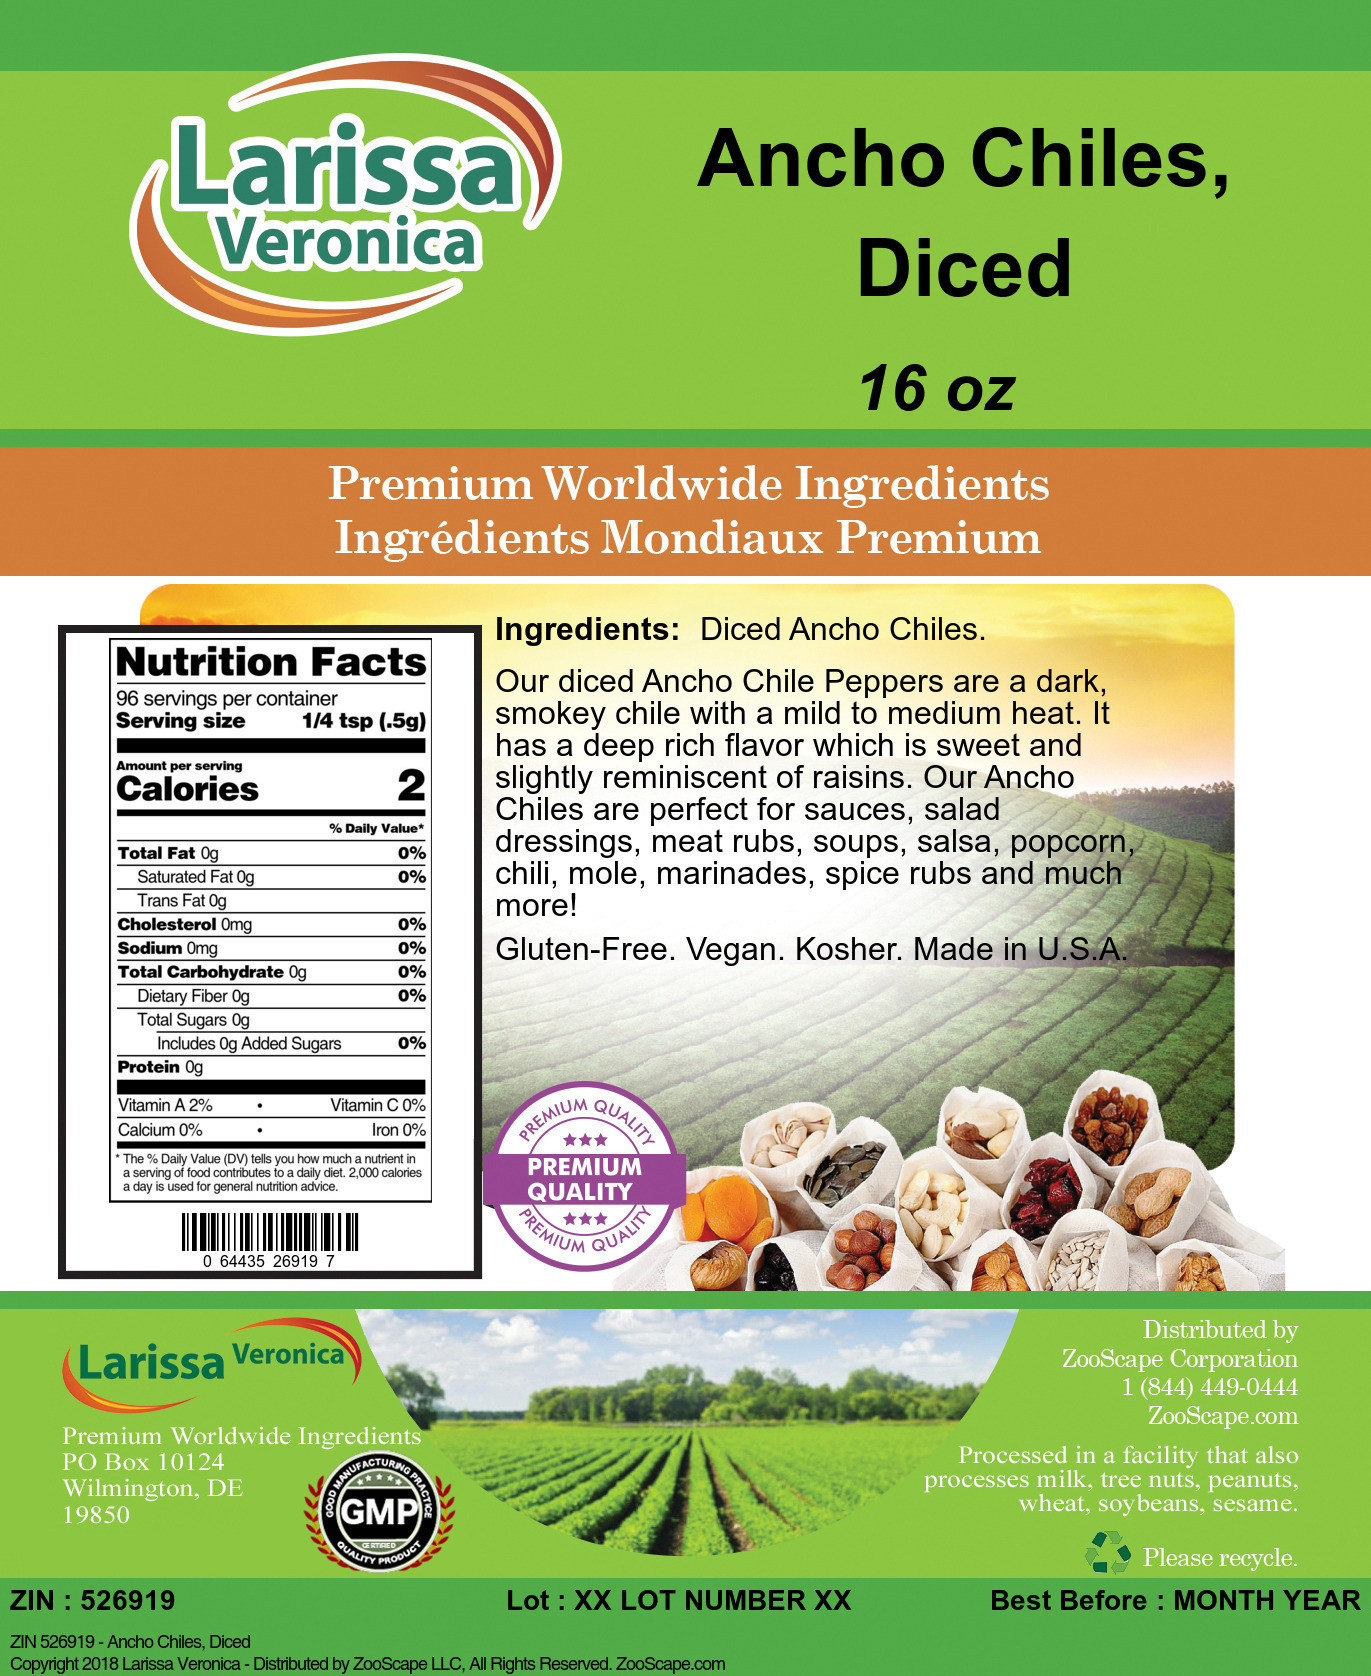 Ancho Chiles, Diced - Label